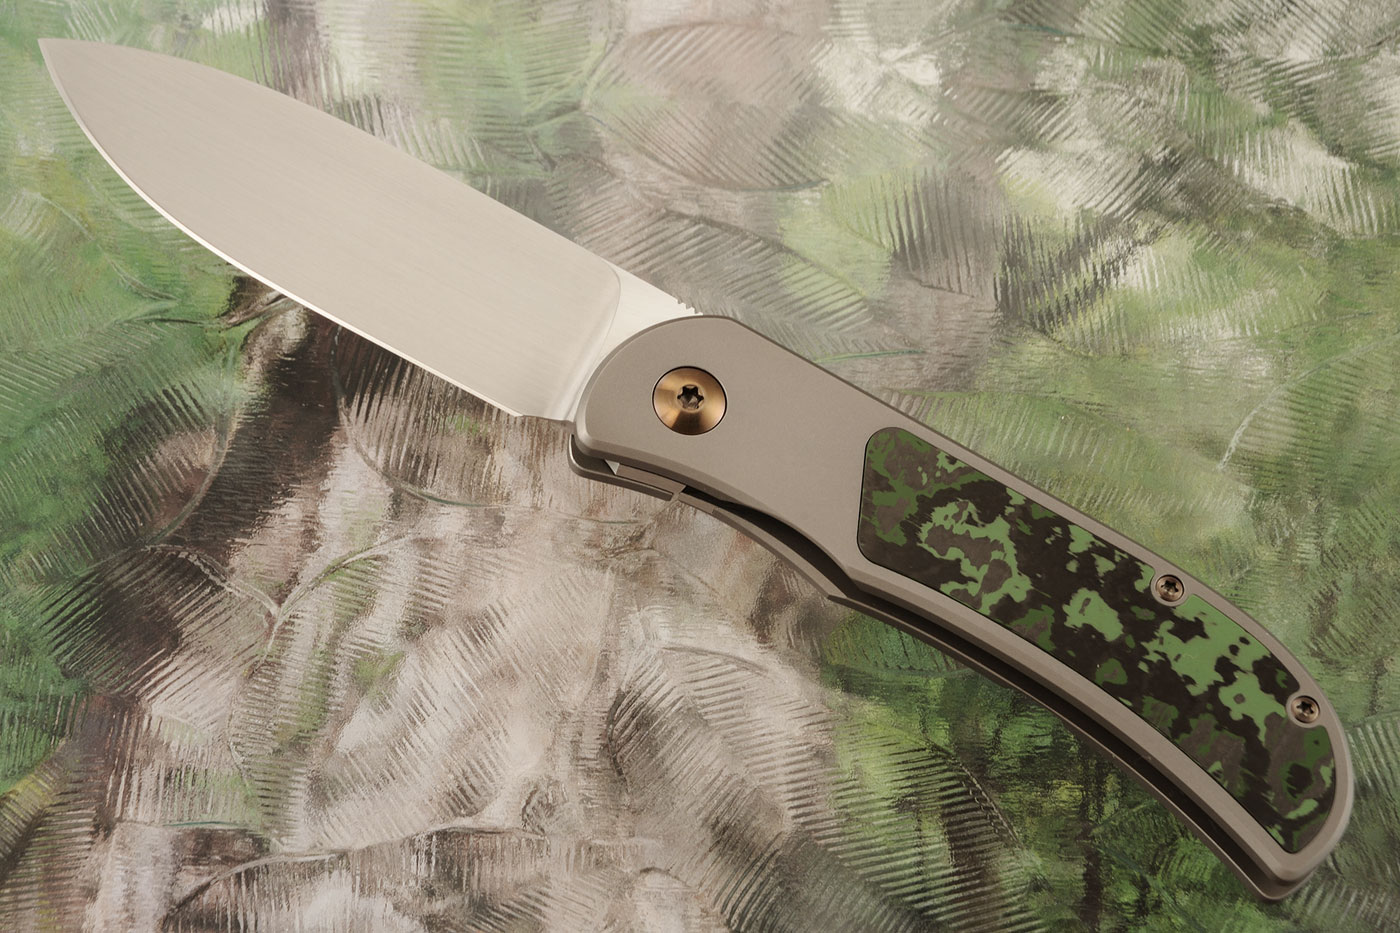 LEXK SFL Framelock Front Flipper with FatCarbon Inlay - Satin Finish, Drop Point